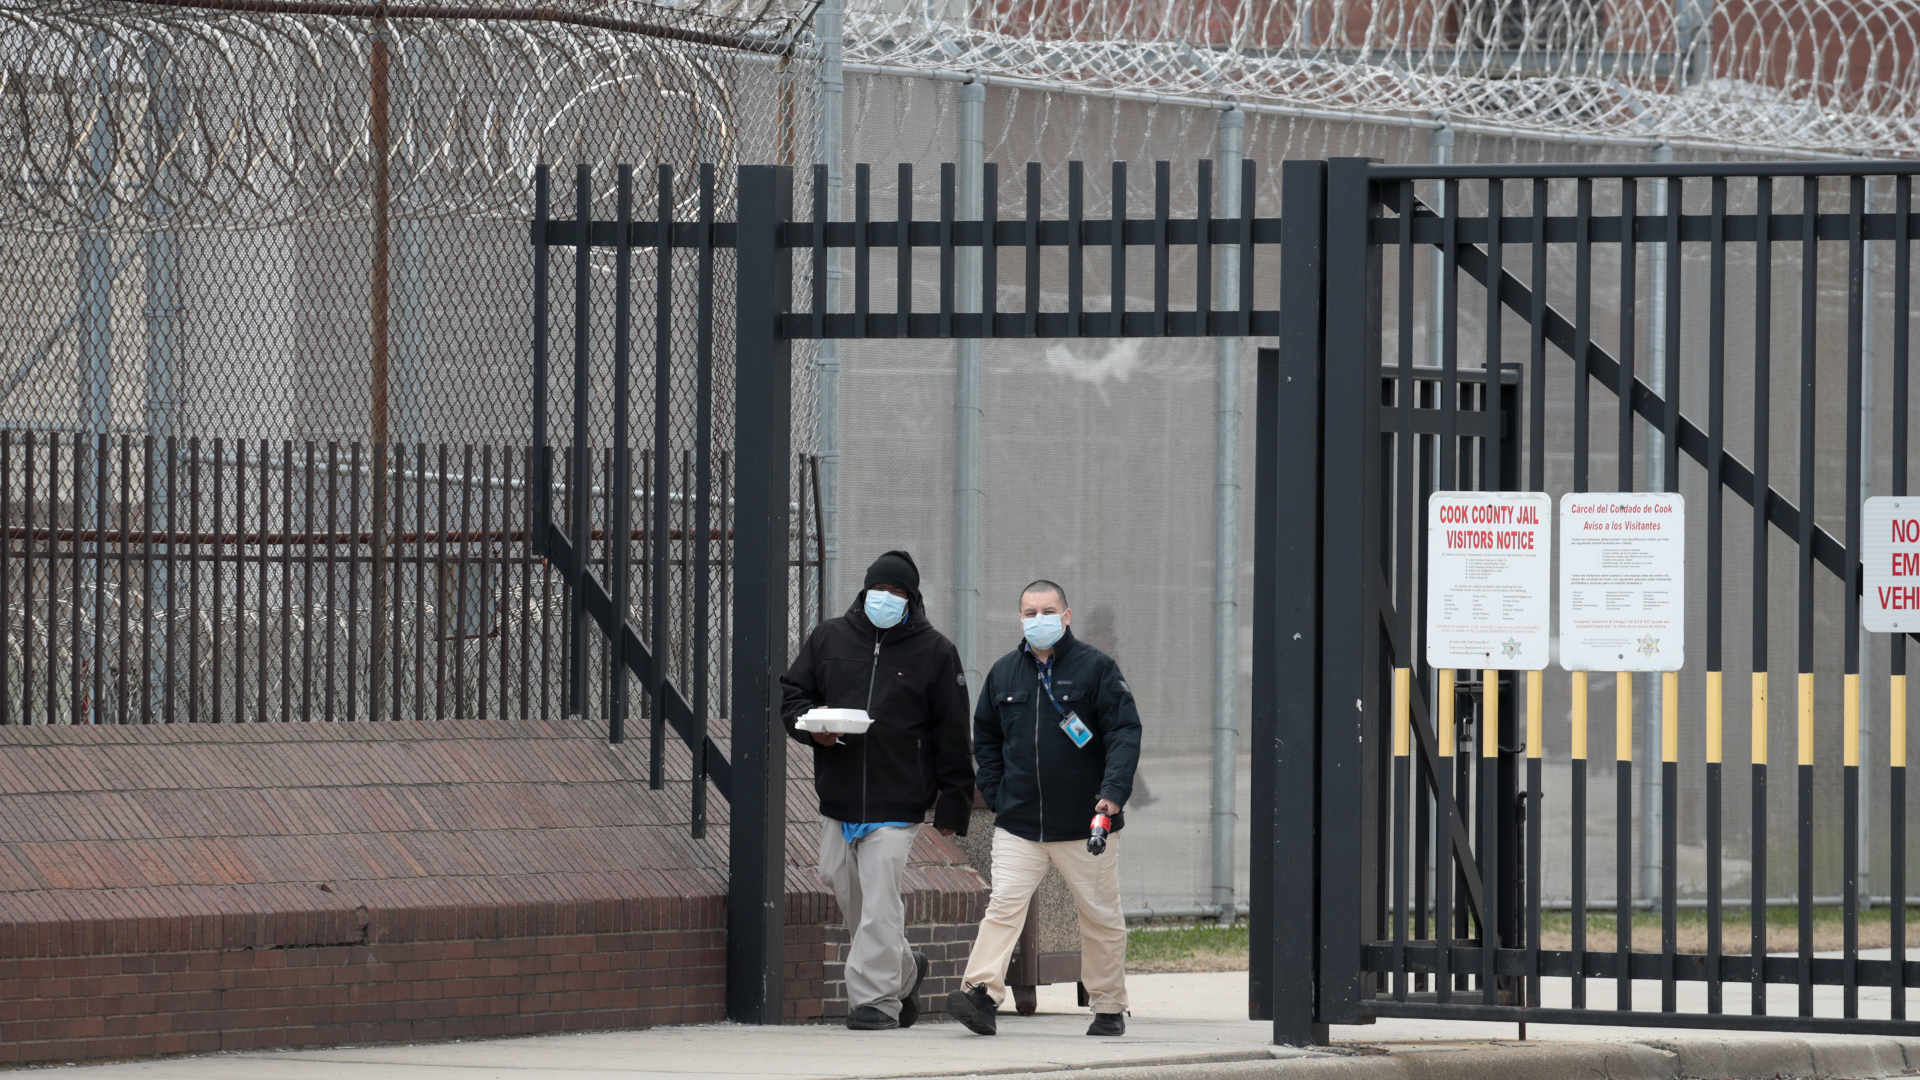 In Chicago, people wearing protective masks leave the Cook County jail complex in April 2020.